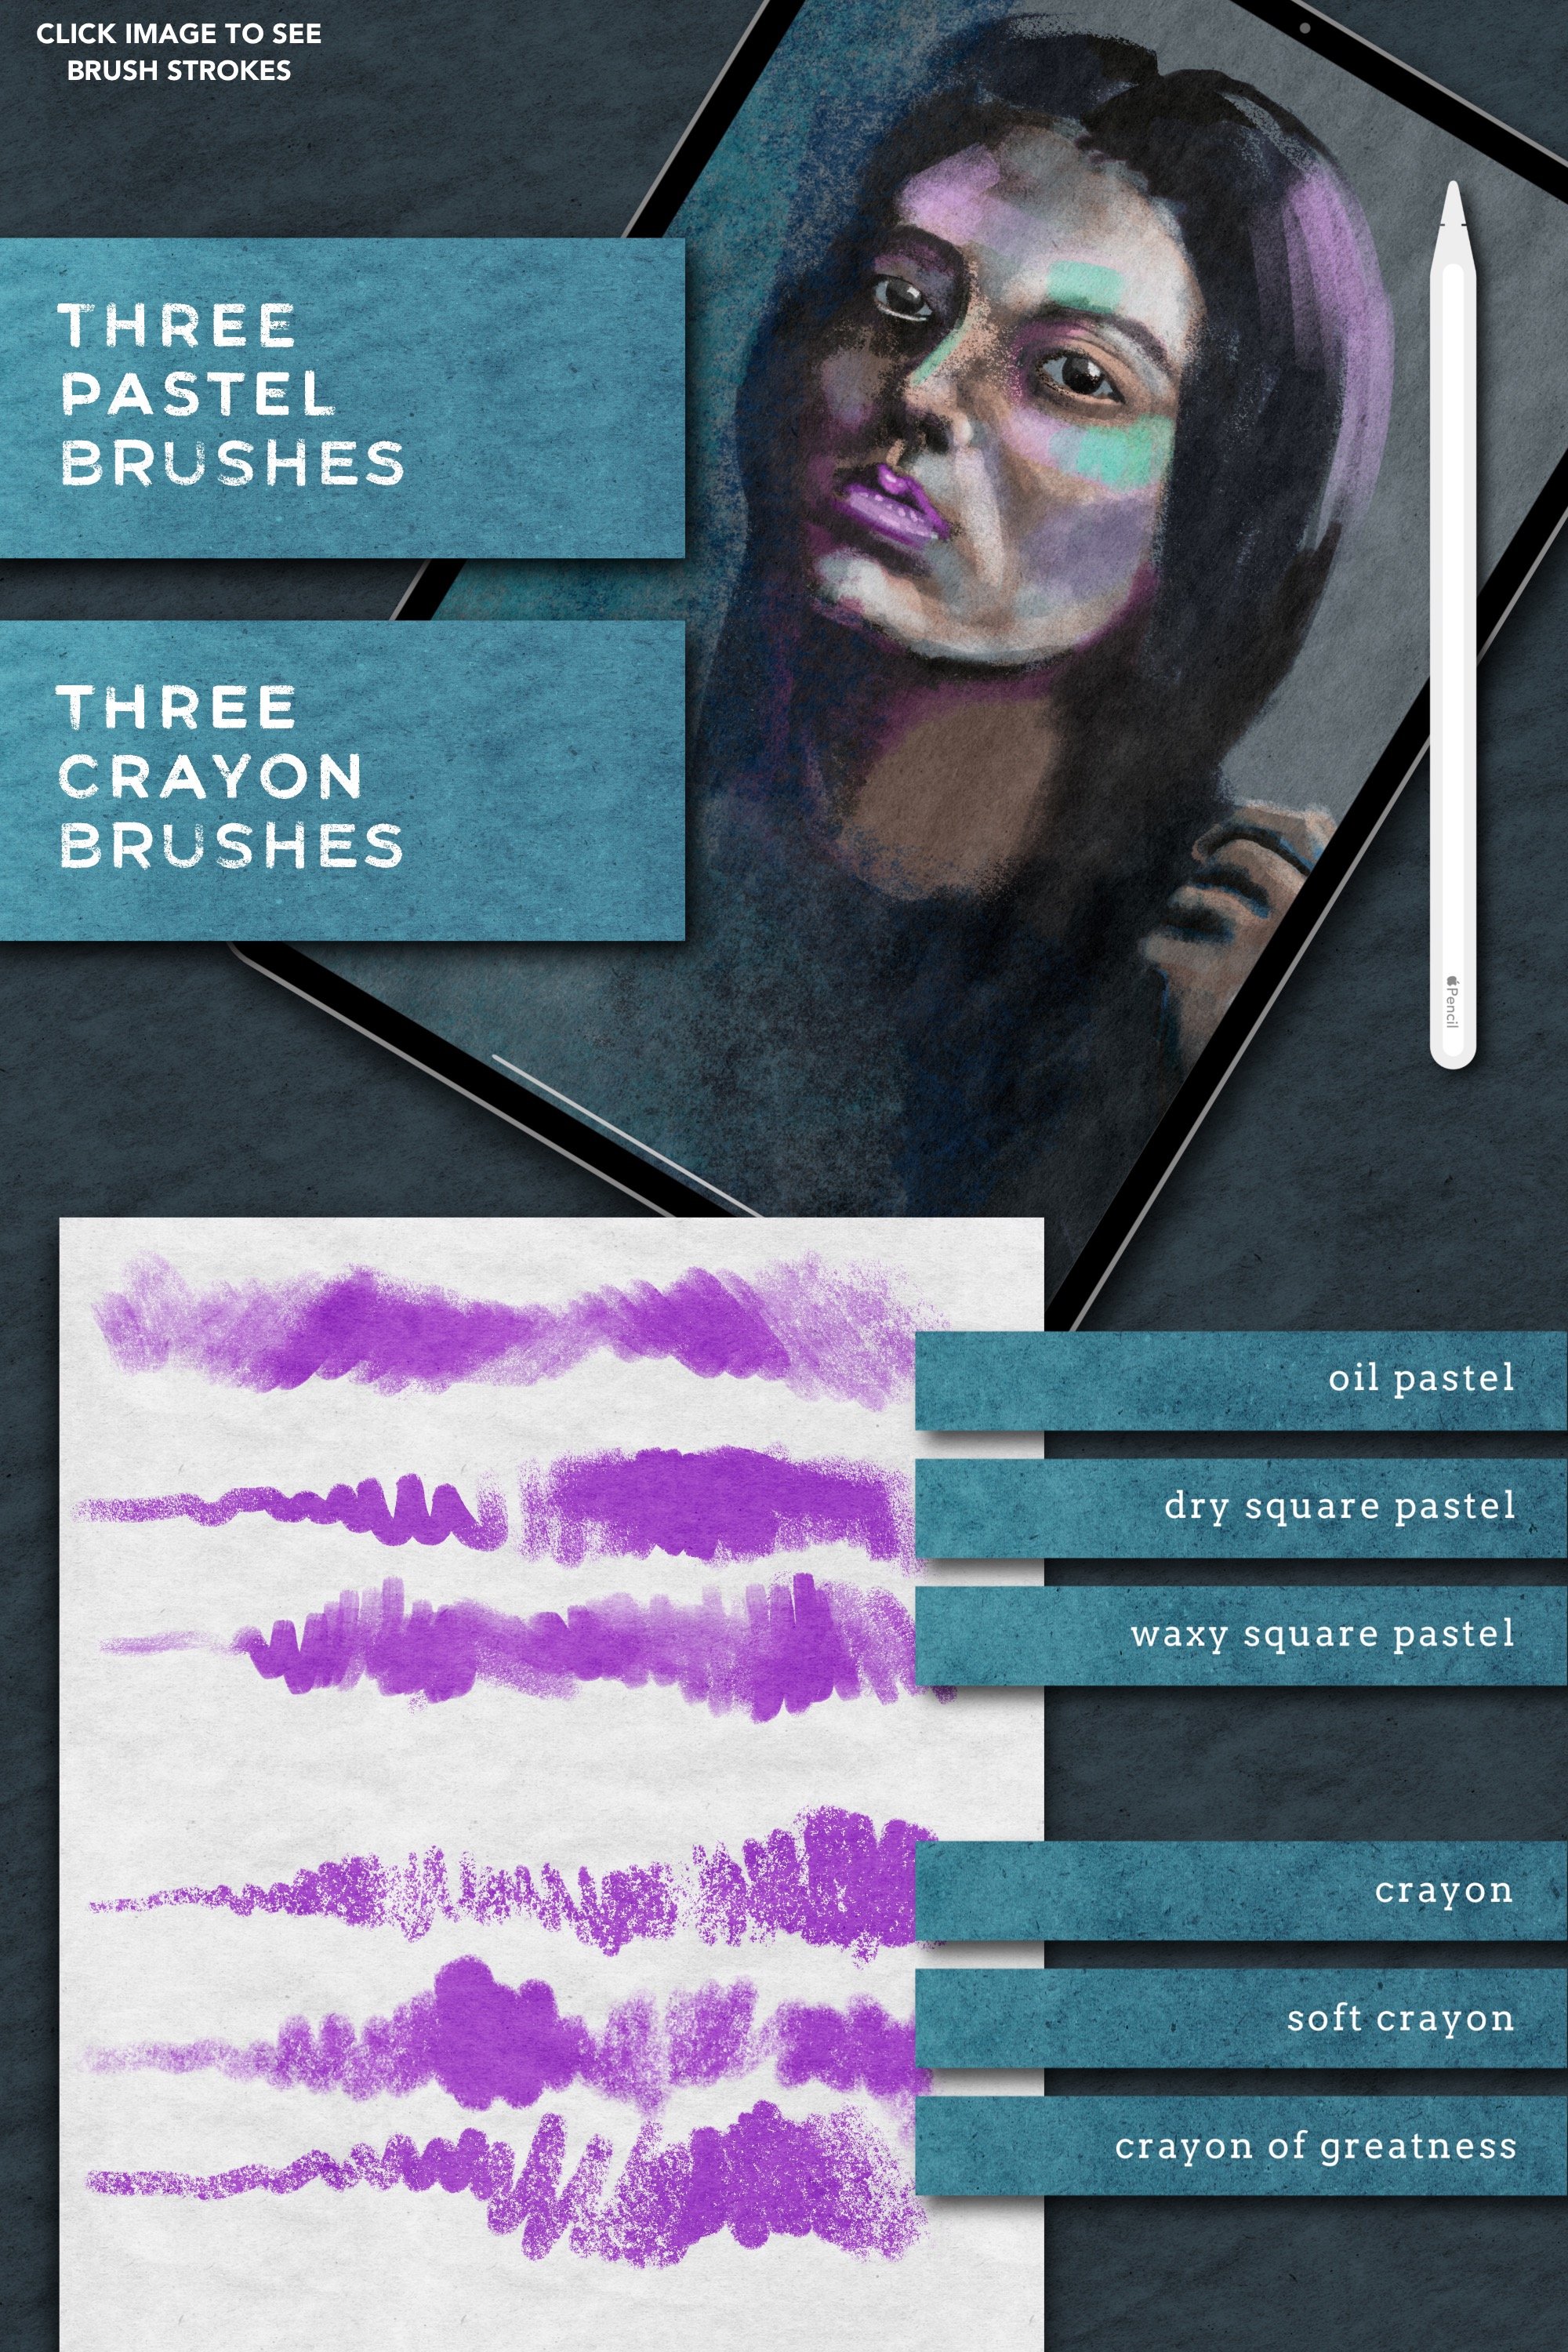 So cool purple brushes.